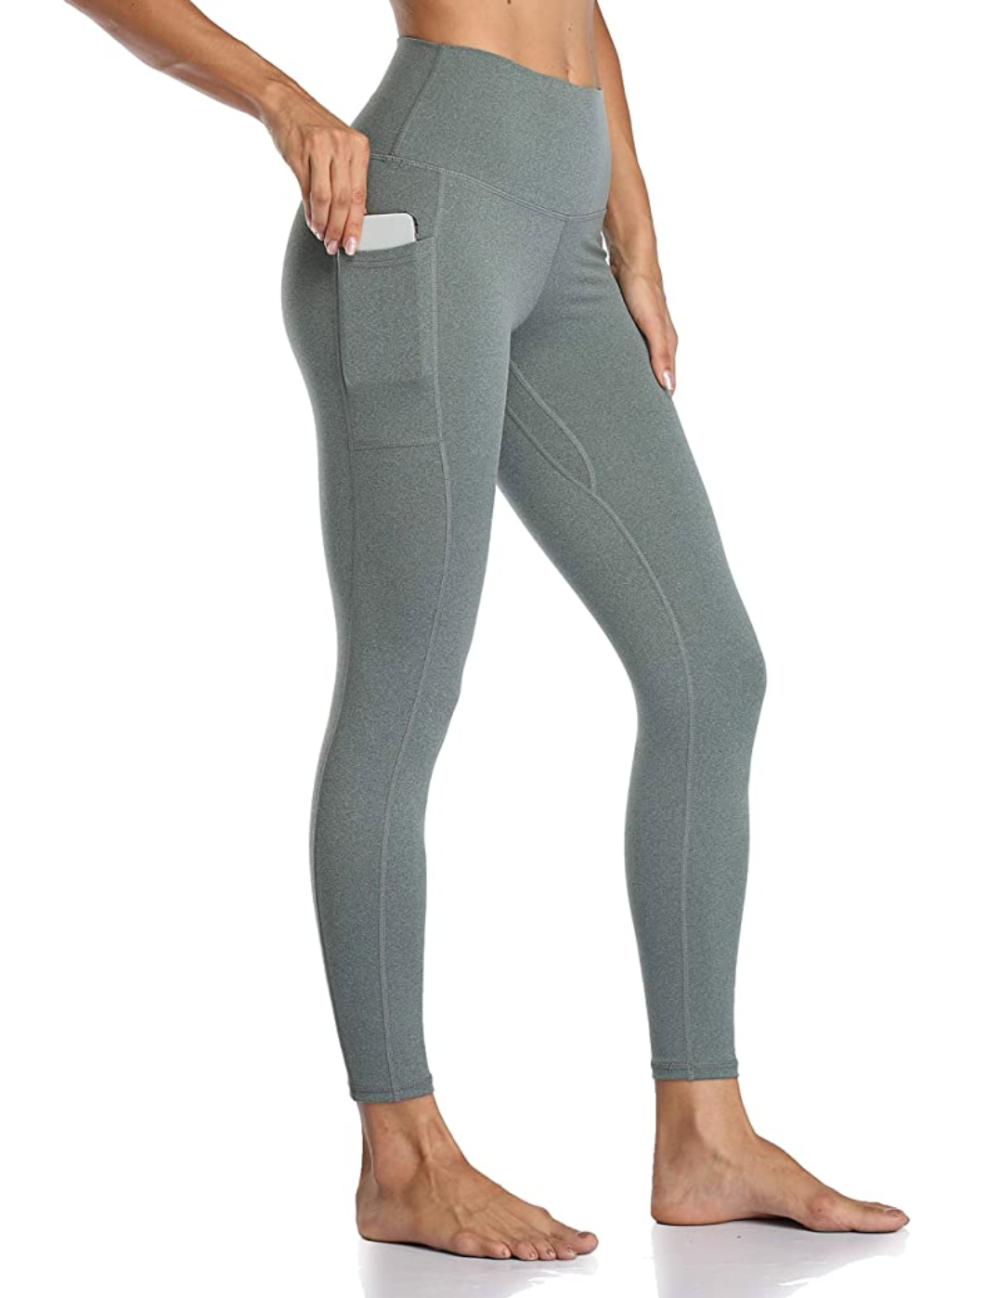 Amazon Shoppers Keep Comparing These $25 Leggings to Top Brands | Us Weekly